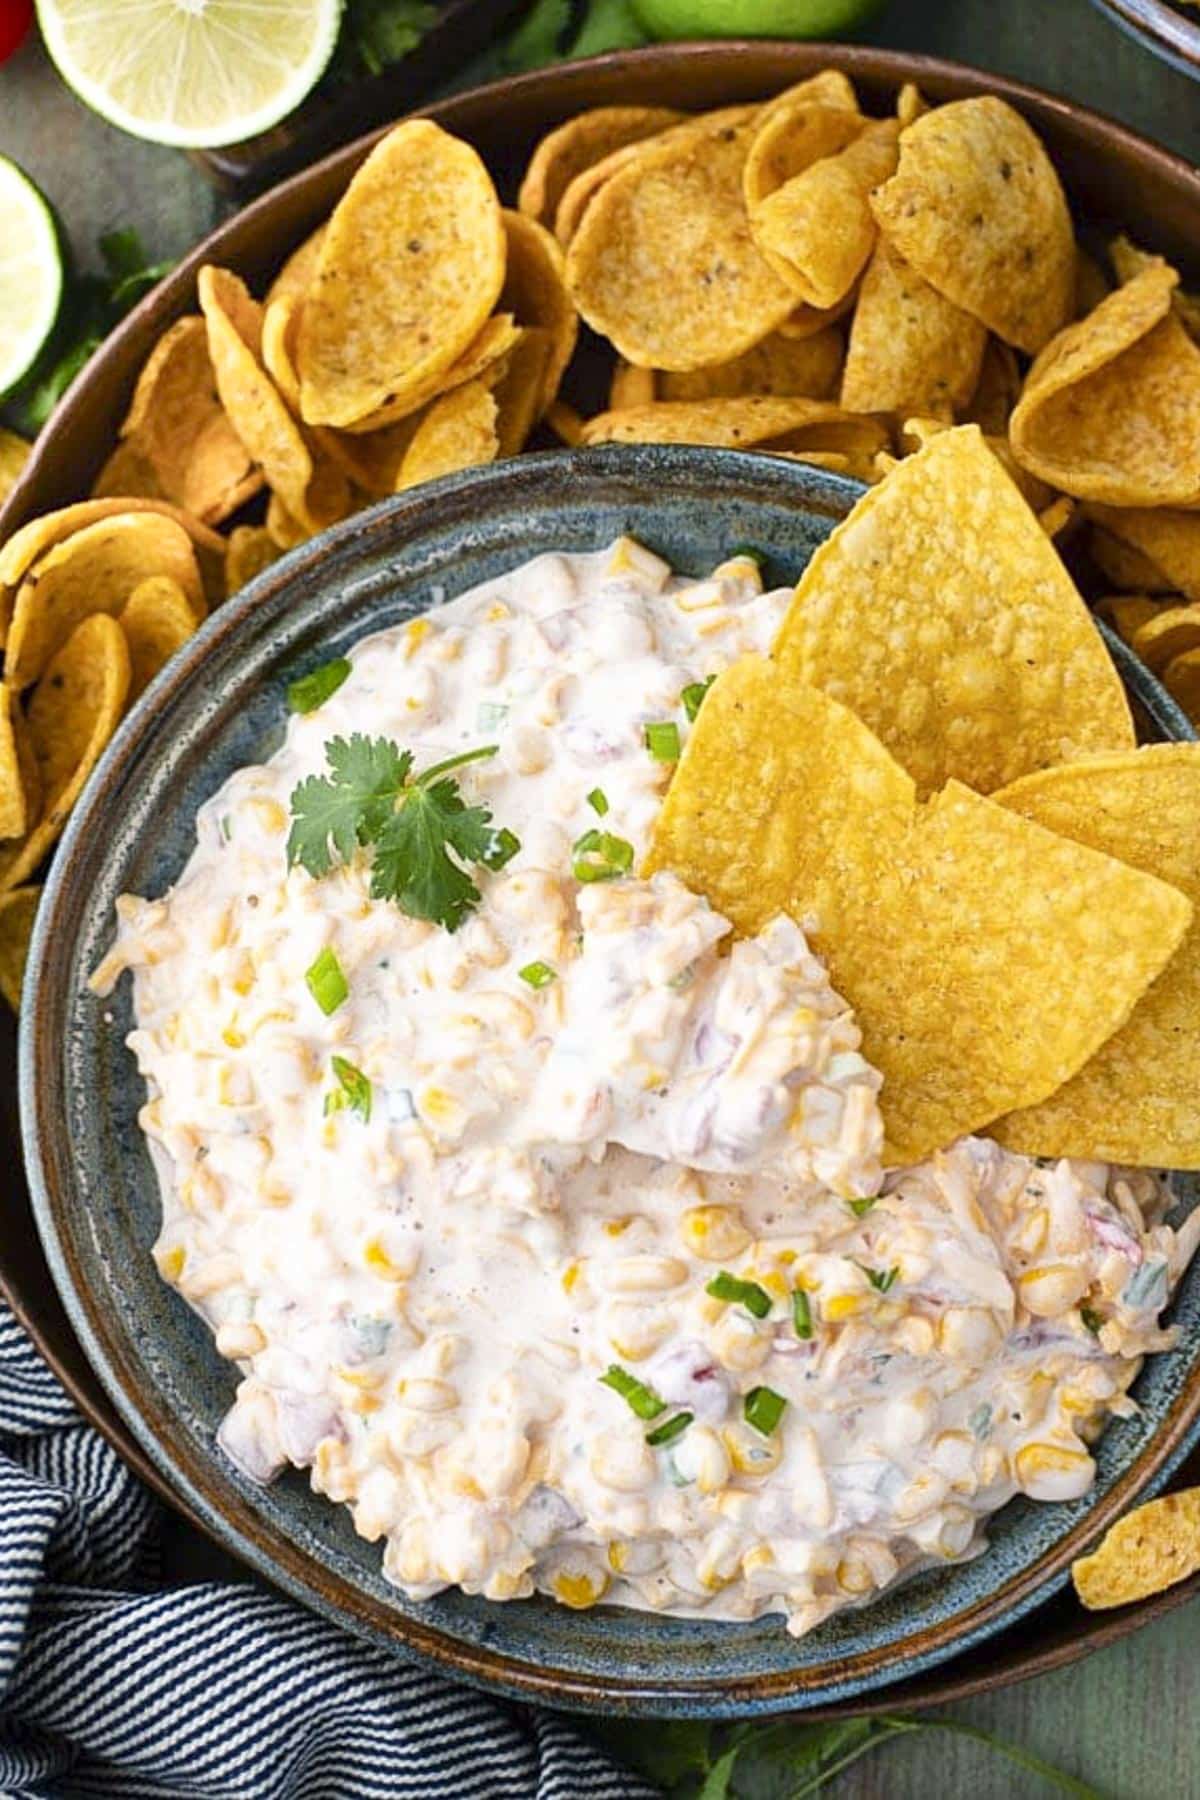 Overhead shot of an easy corn dip recipe served in a blue bowl with a side of tortilla chips.